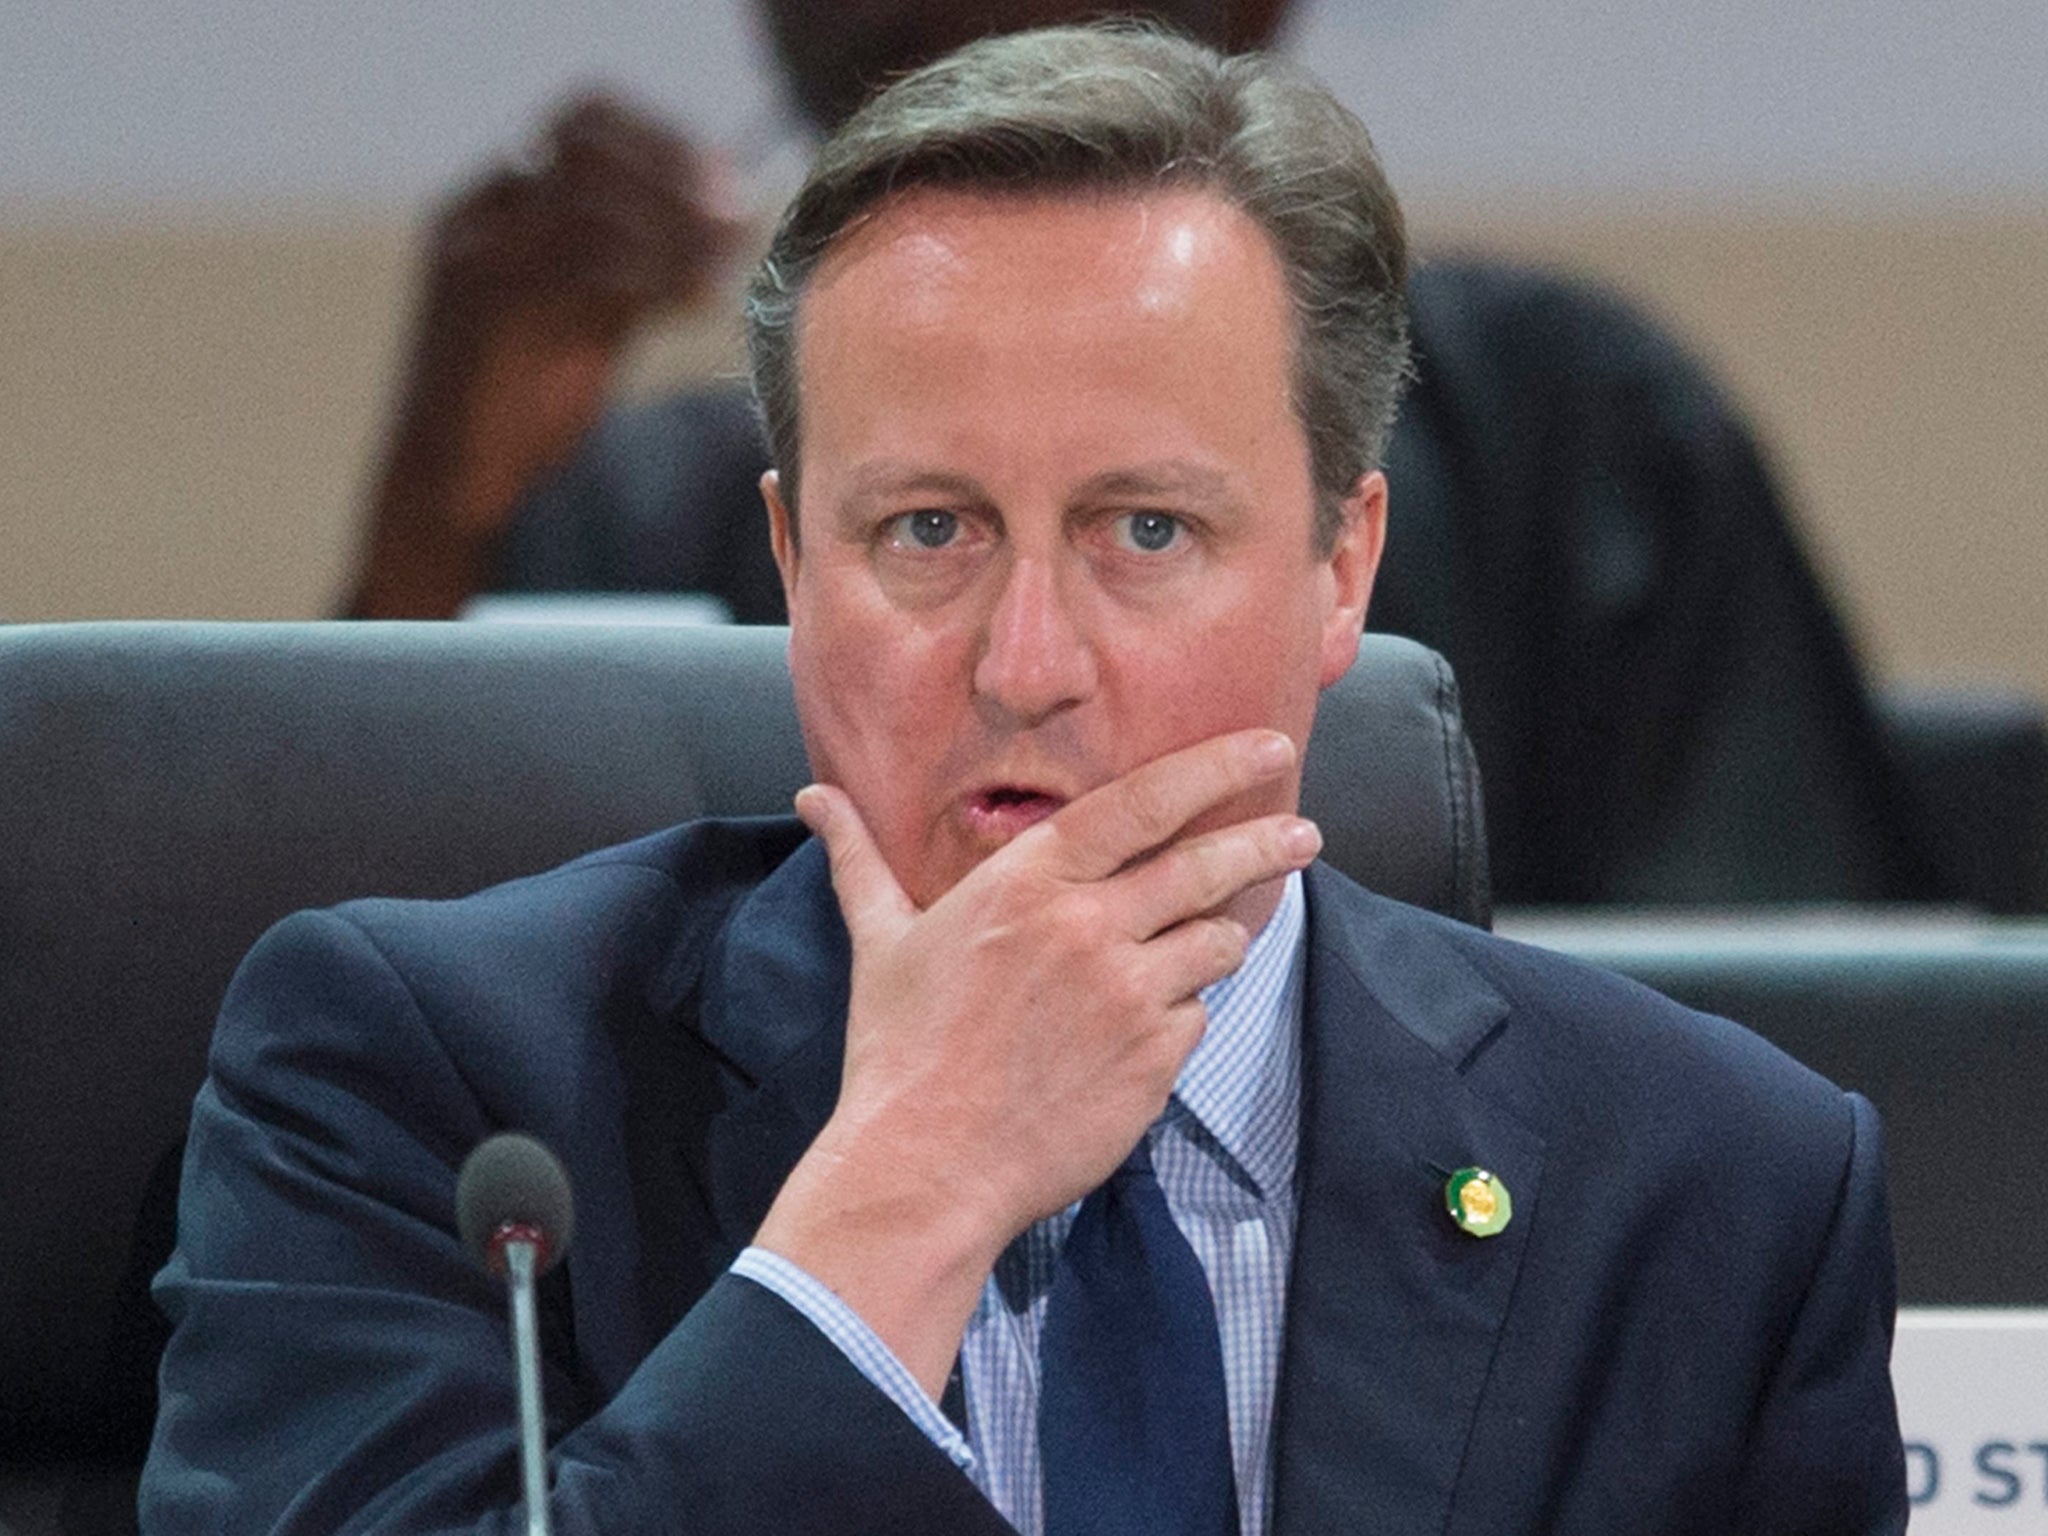 David Cameron intervened over EU efforts to crack down on tax avoidance through the use of offshore trusts